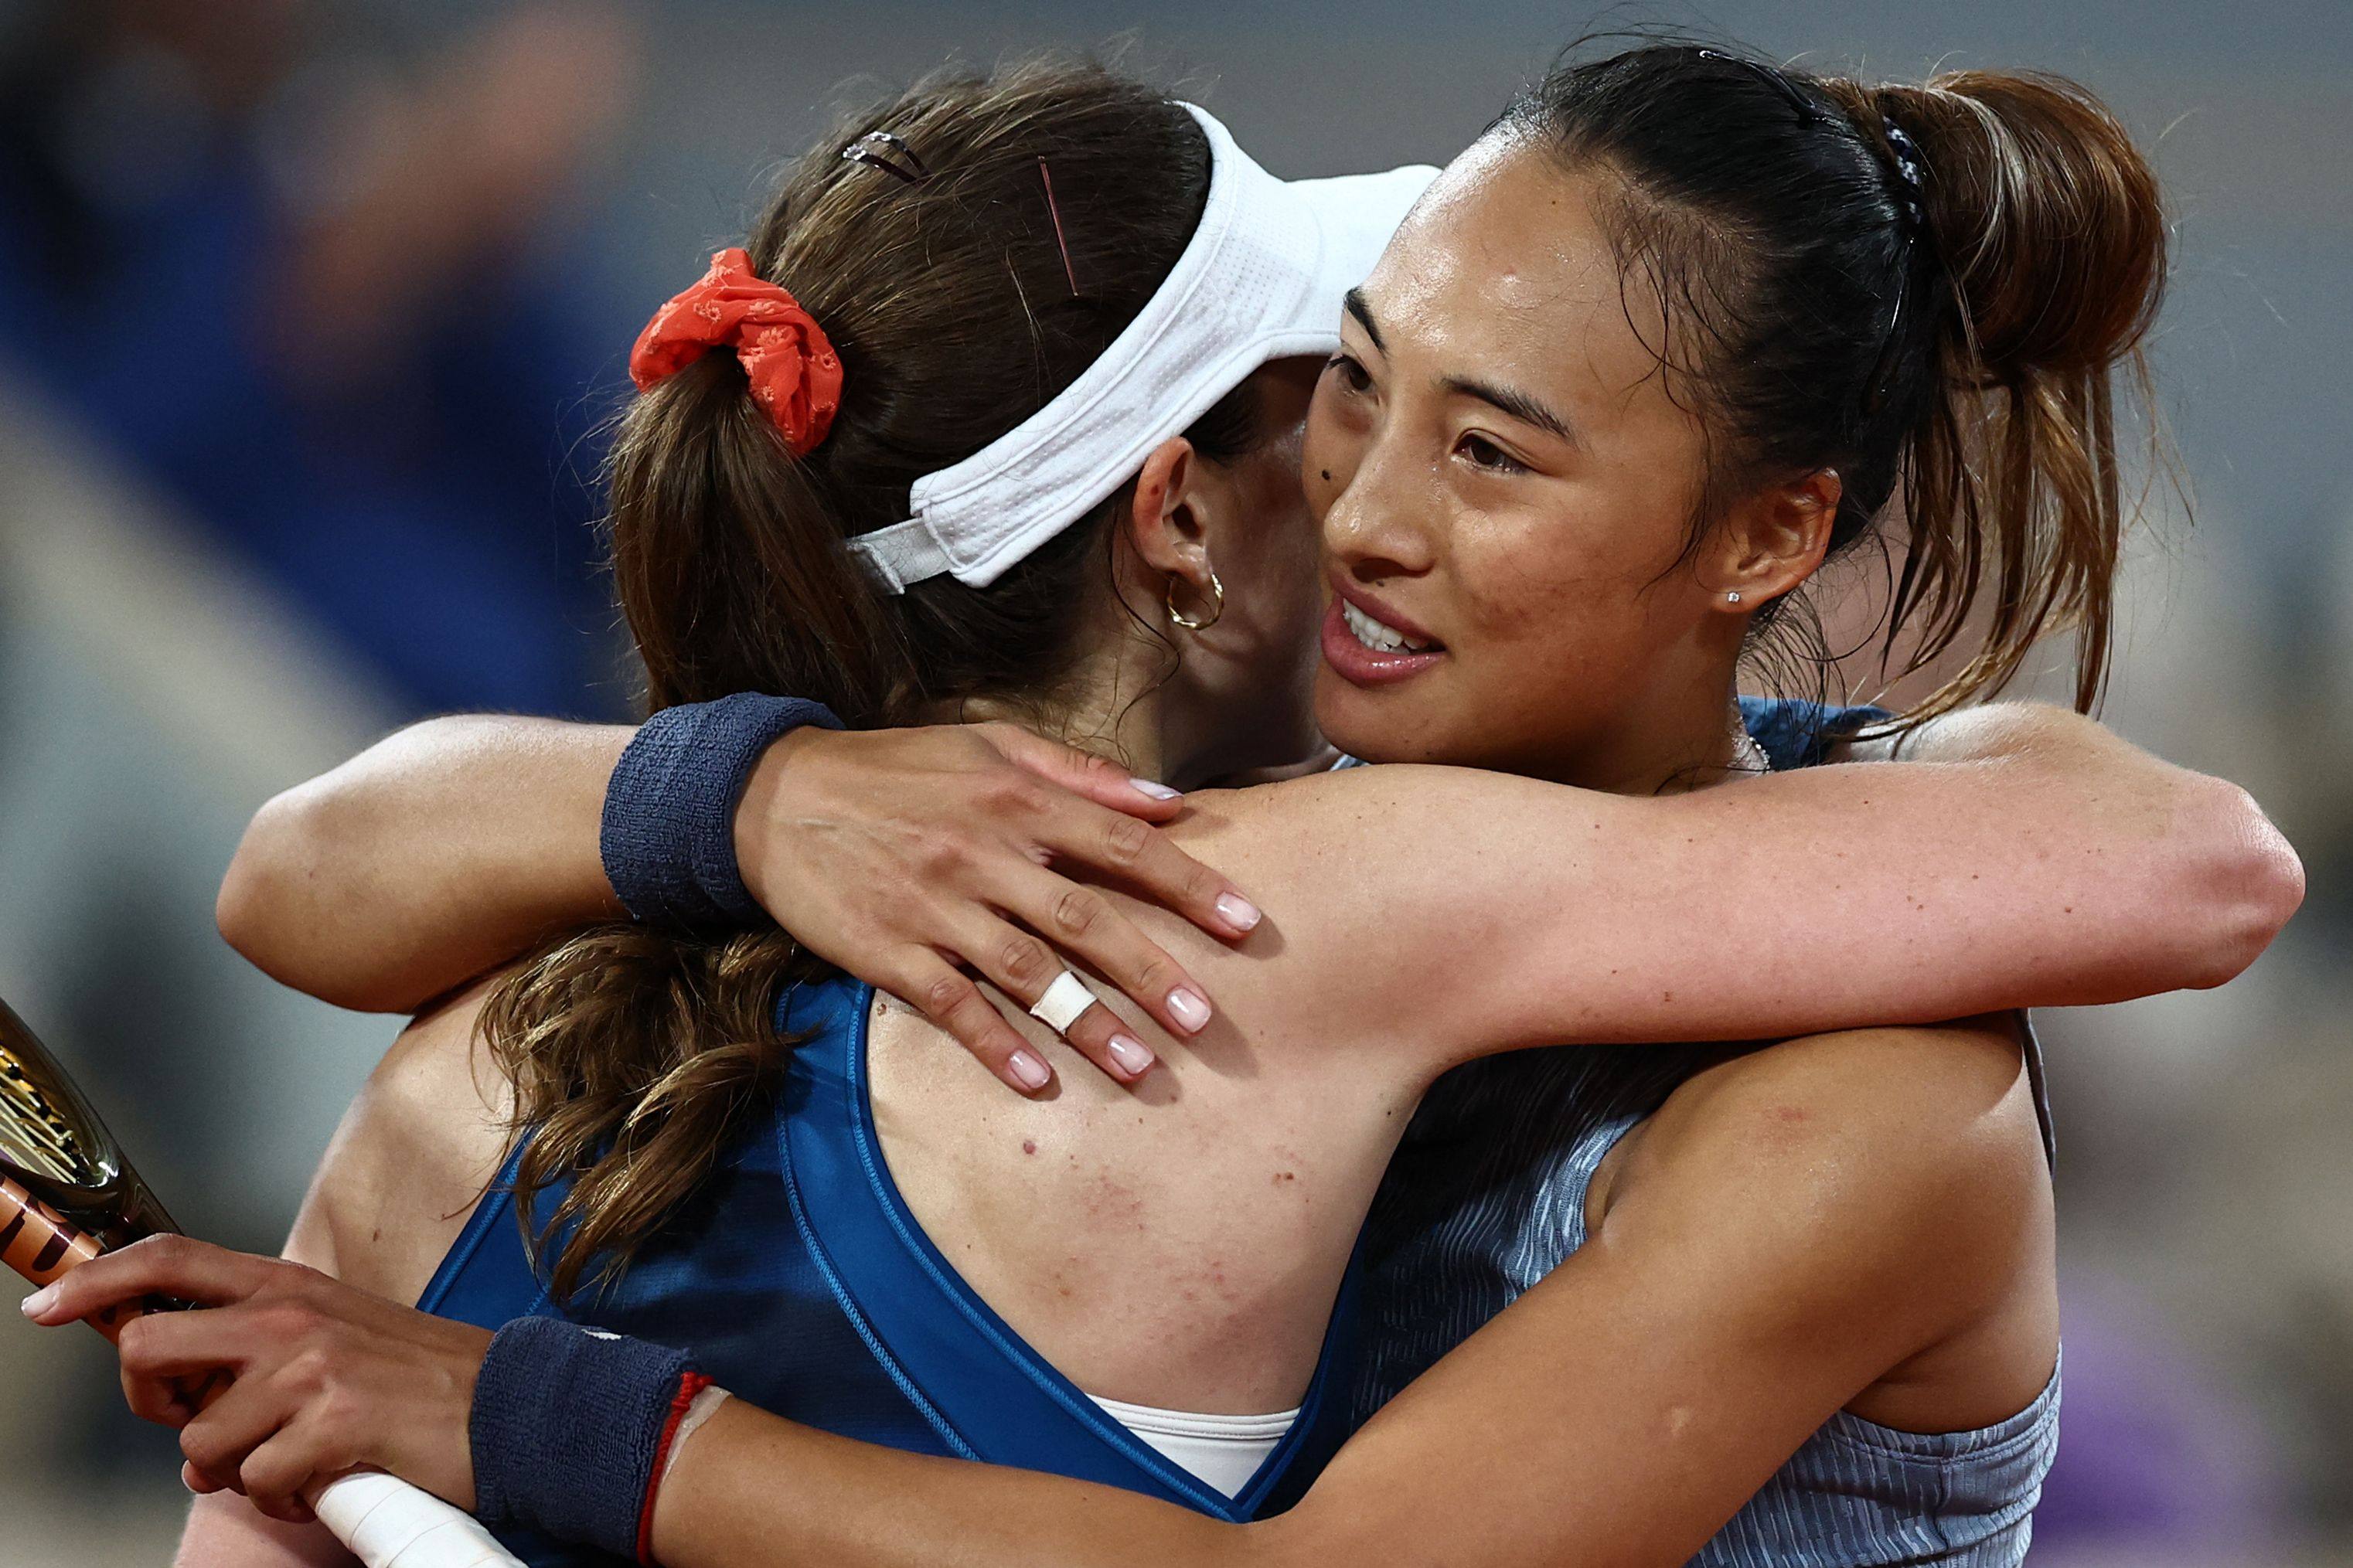 China’s Zheng Qinwen (right) embraces France’s Alize Cornet after winning their women’s singles match at the French Open. Photo: AFP